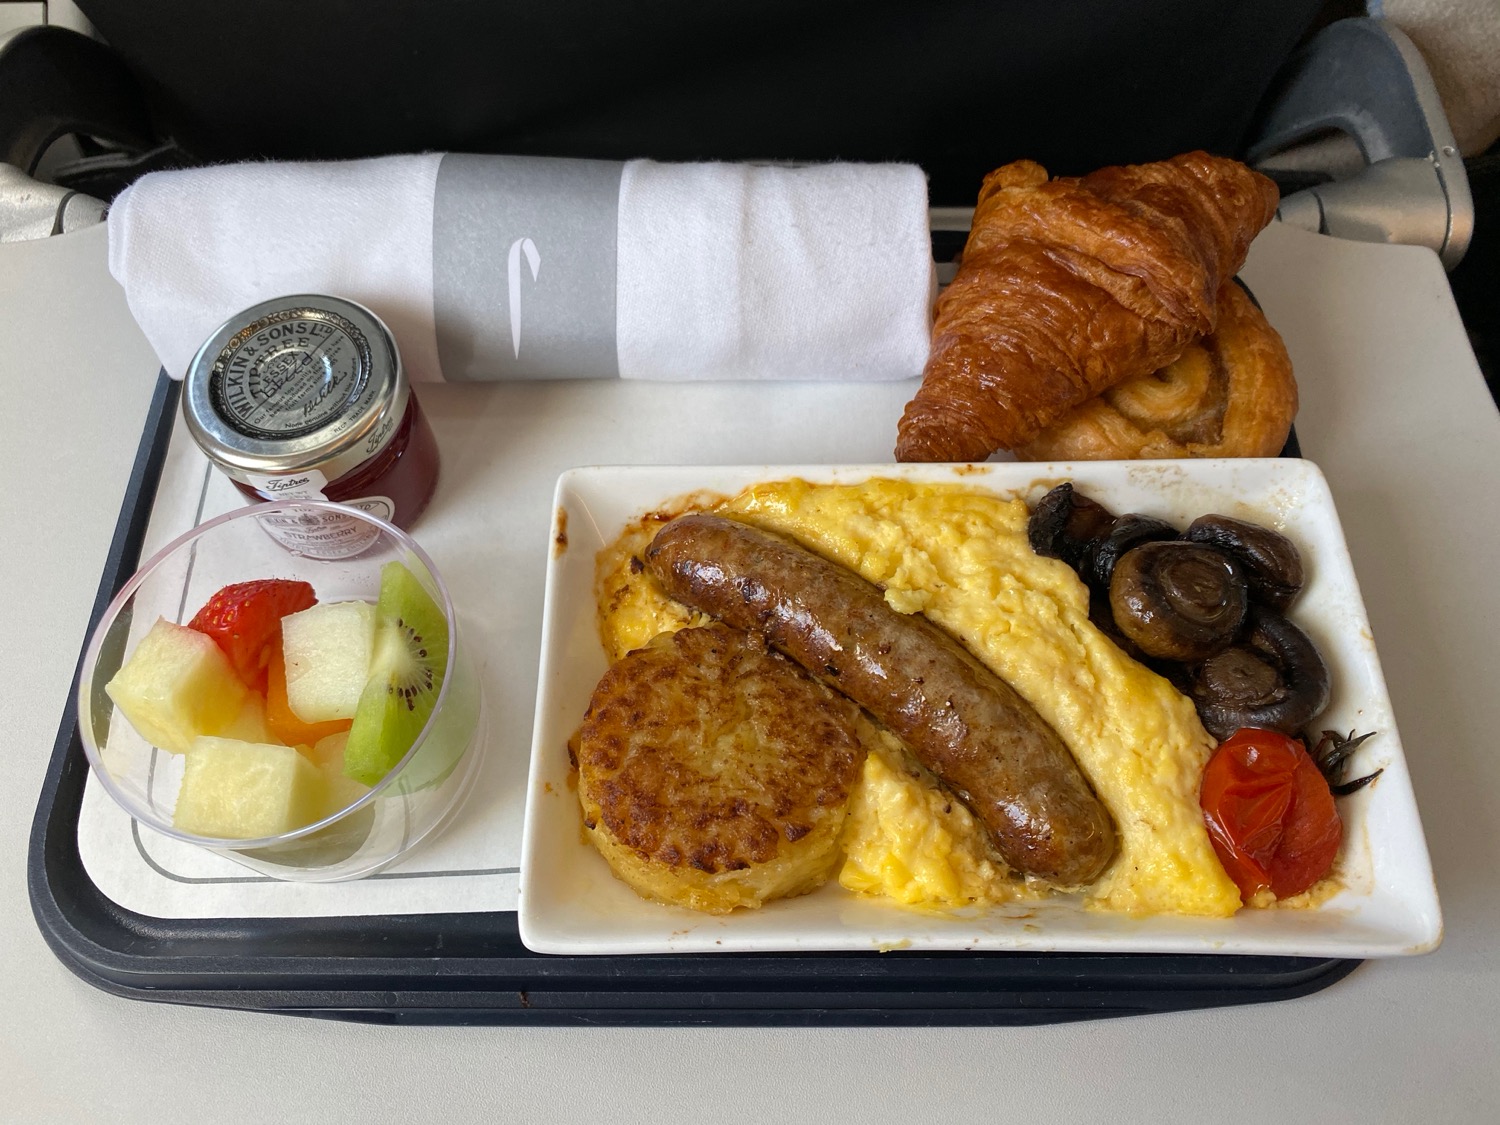 Breakfast, Lunch, And Dinner On British Airways Live and Let's Fly